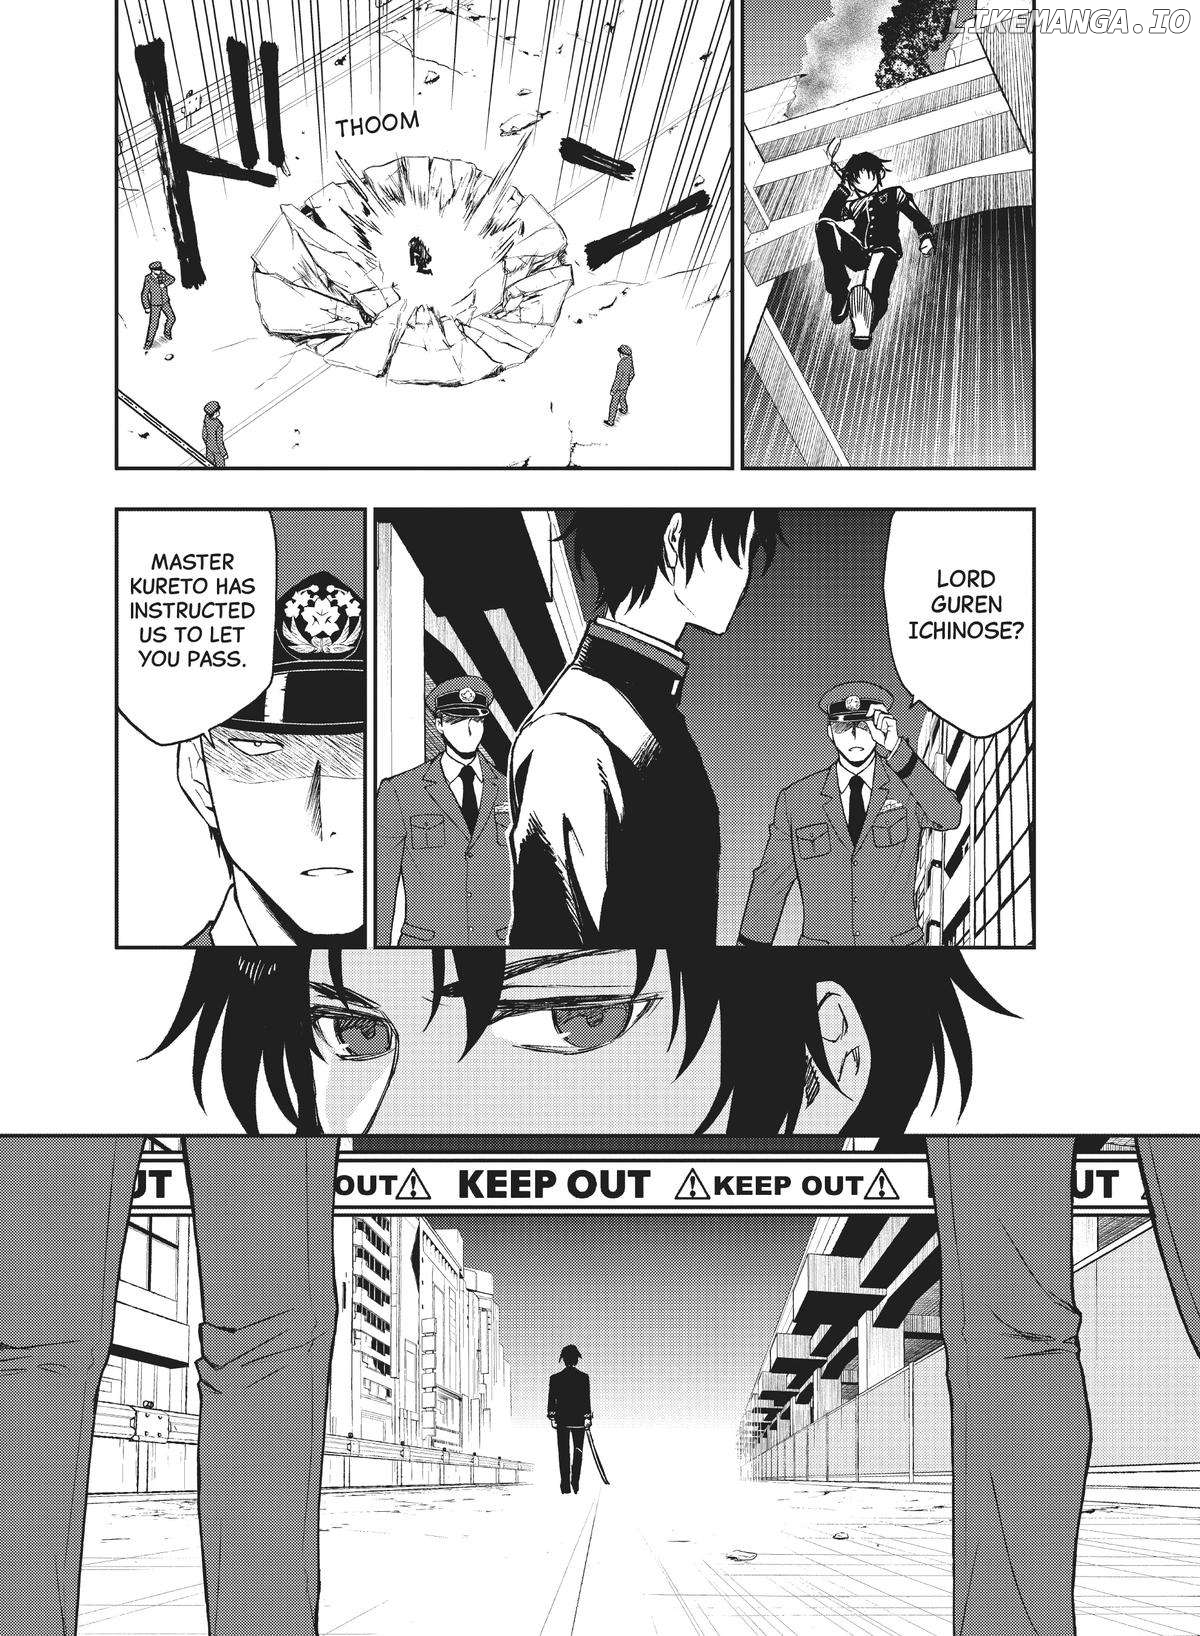 Seraph of the End: Guren Ichinose: Catastrophe at Sixteen Chapter 30 - page 11